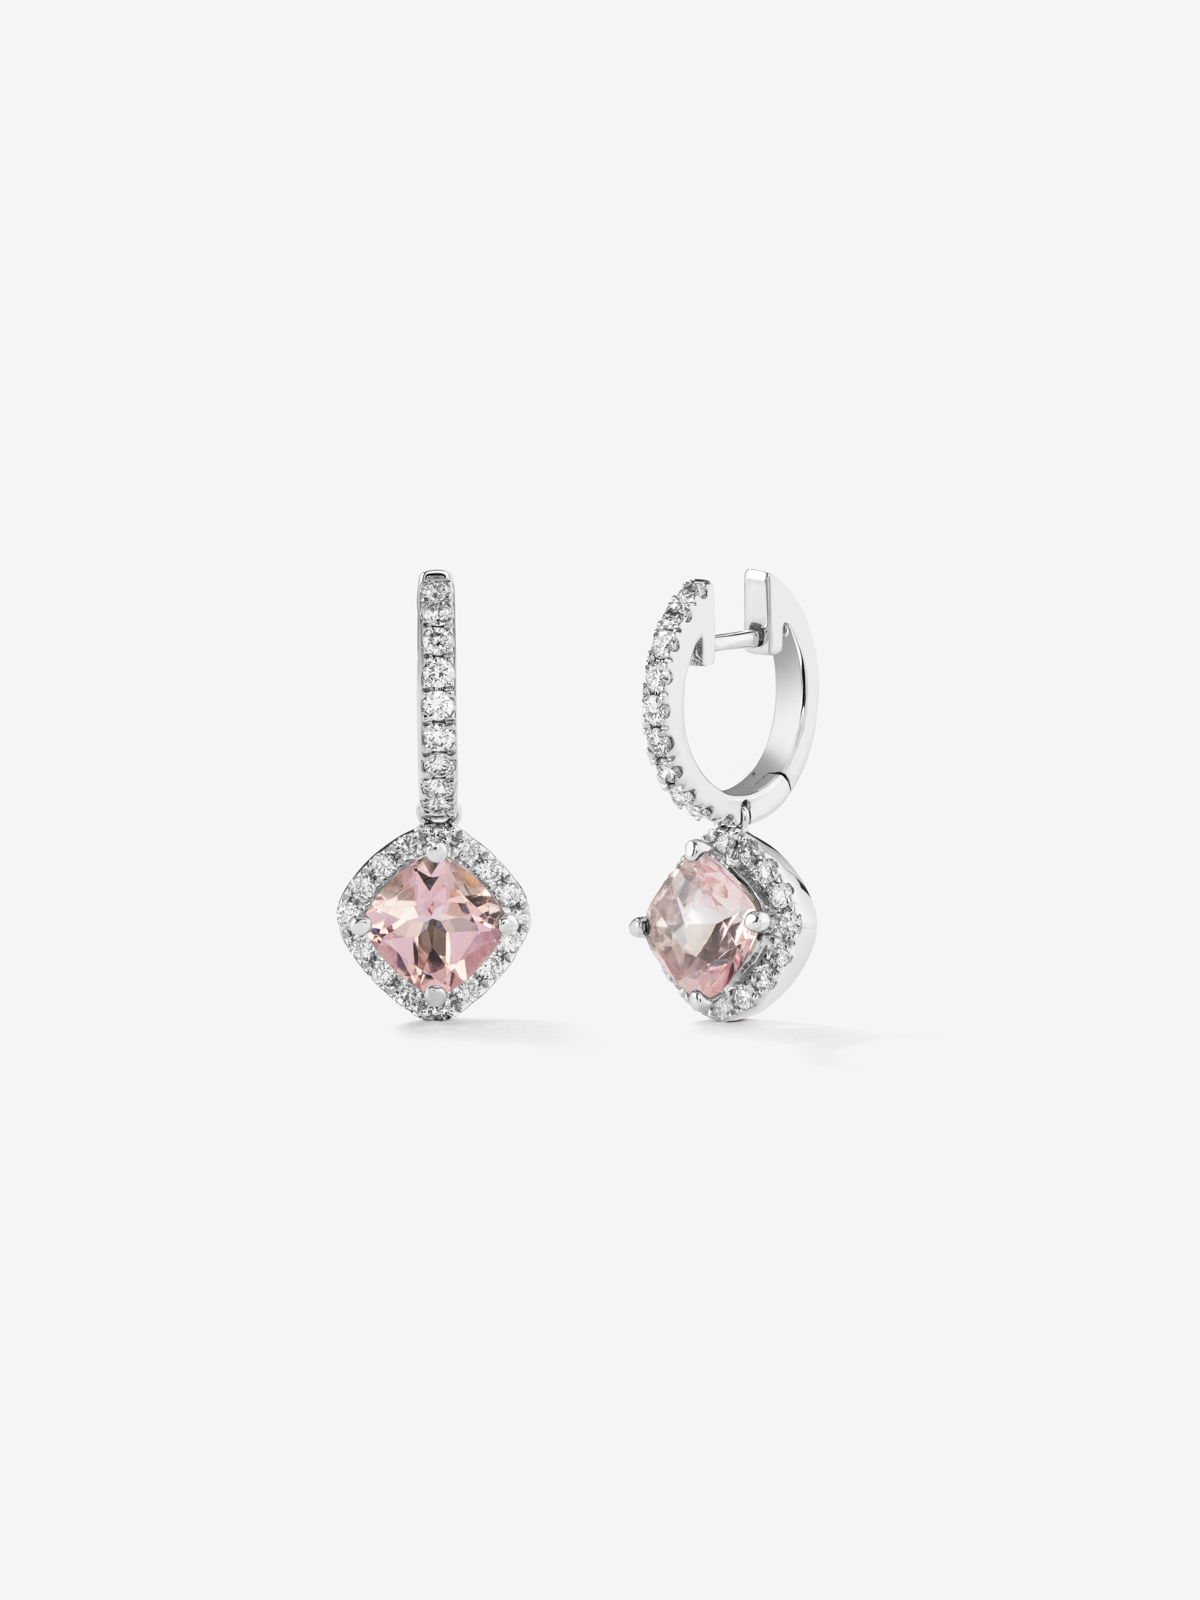 White gold earrings with pink morganitas in 1.78 cts and diamonds in bright size